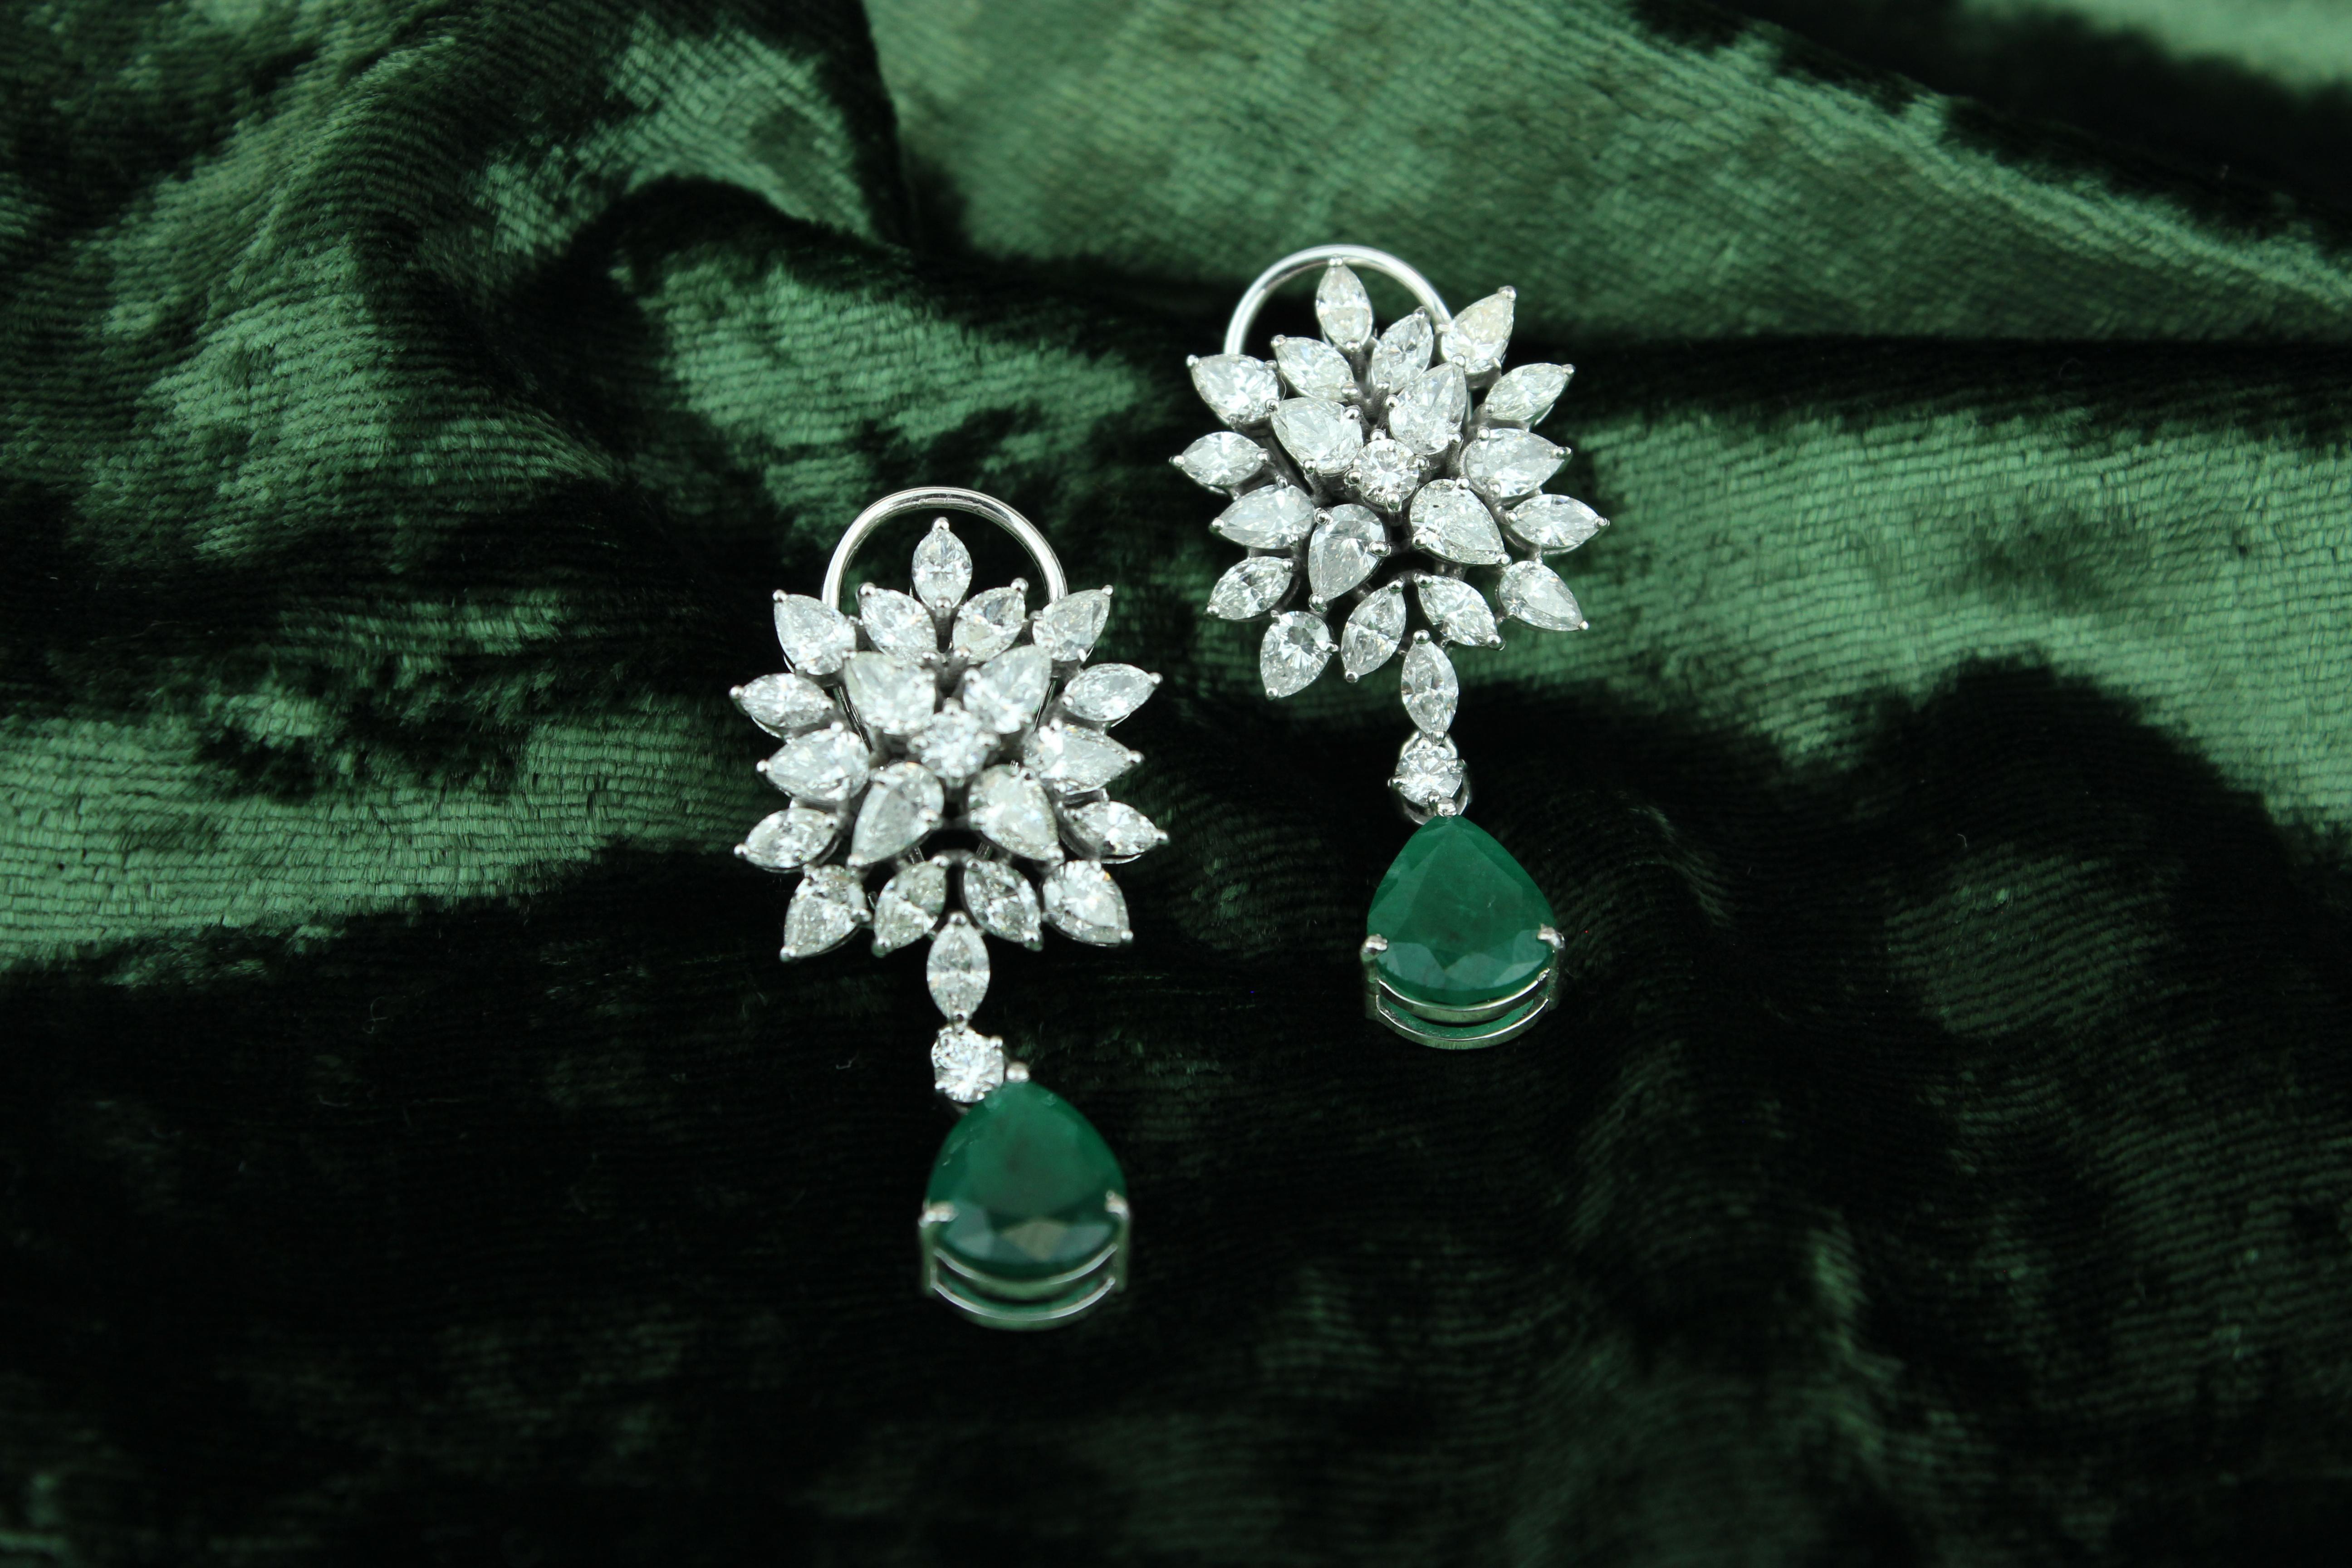 These Earrings are a stunning pair of earrings that showcase the beauty of brilliantly cut marquise and pear shaped diamonds enhanced by emerald gemstones. The earrings feature a unique design with the diamonds arranged in a cluster and set in 18K